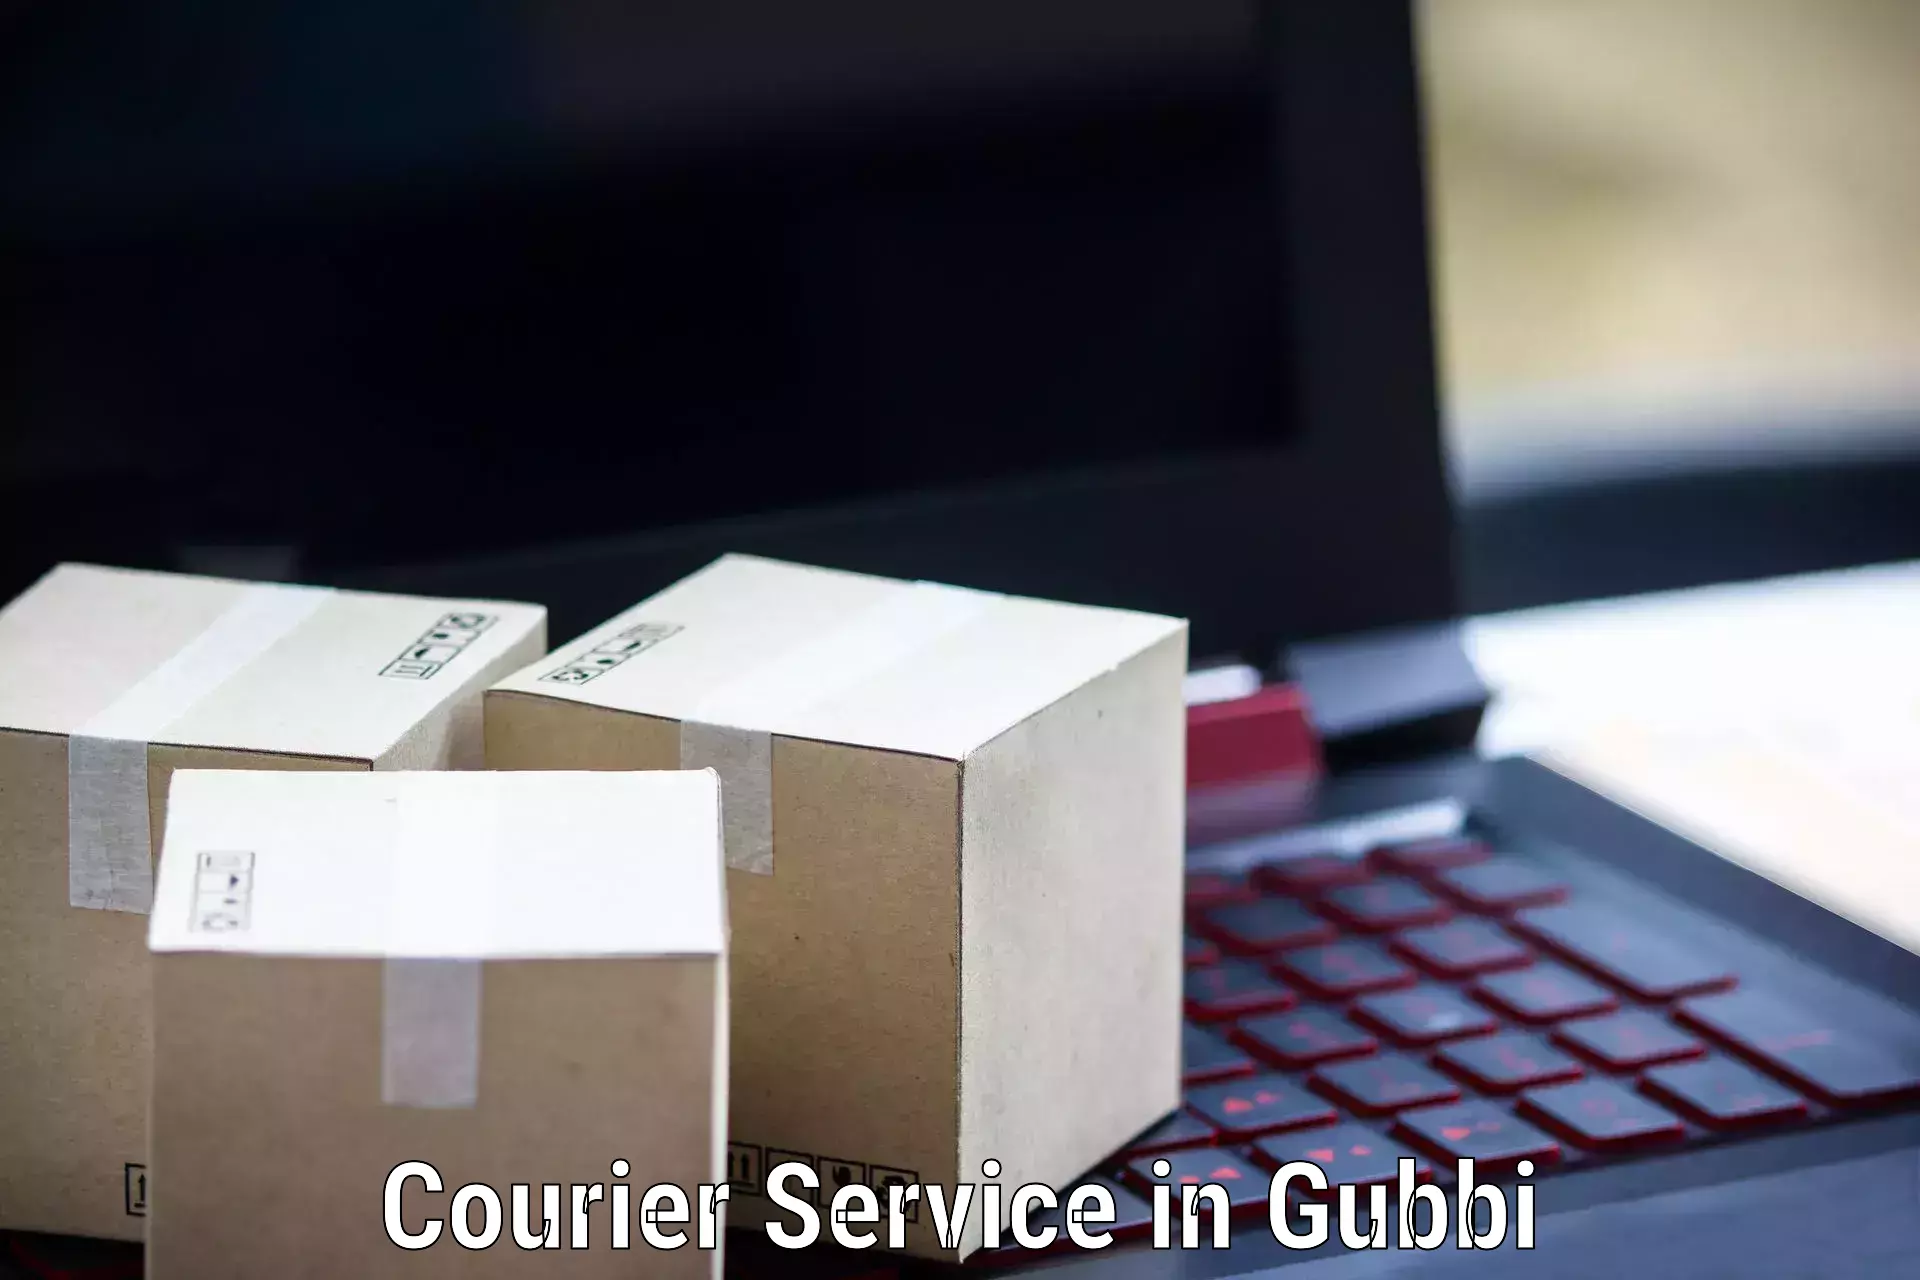 24-hour delivery options in Gubbi